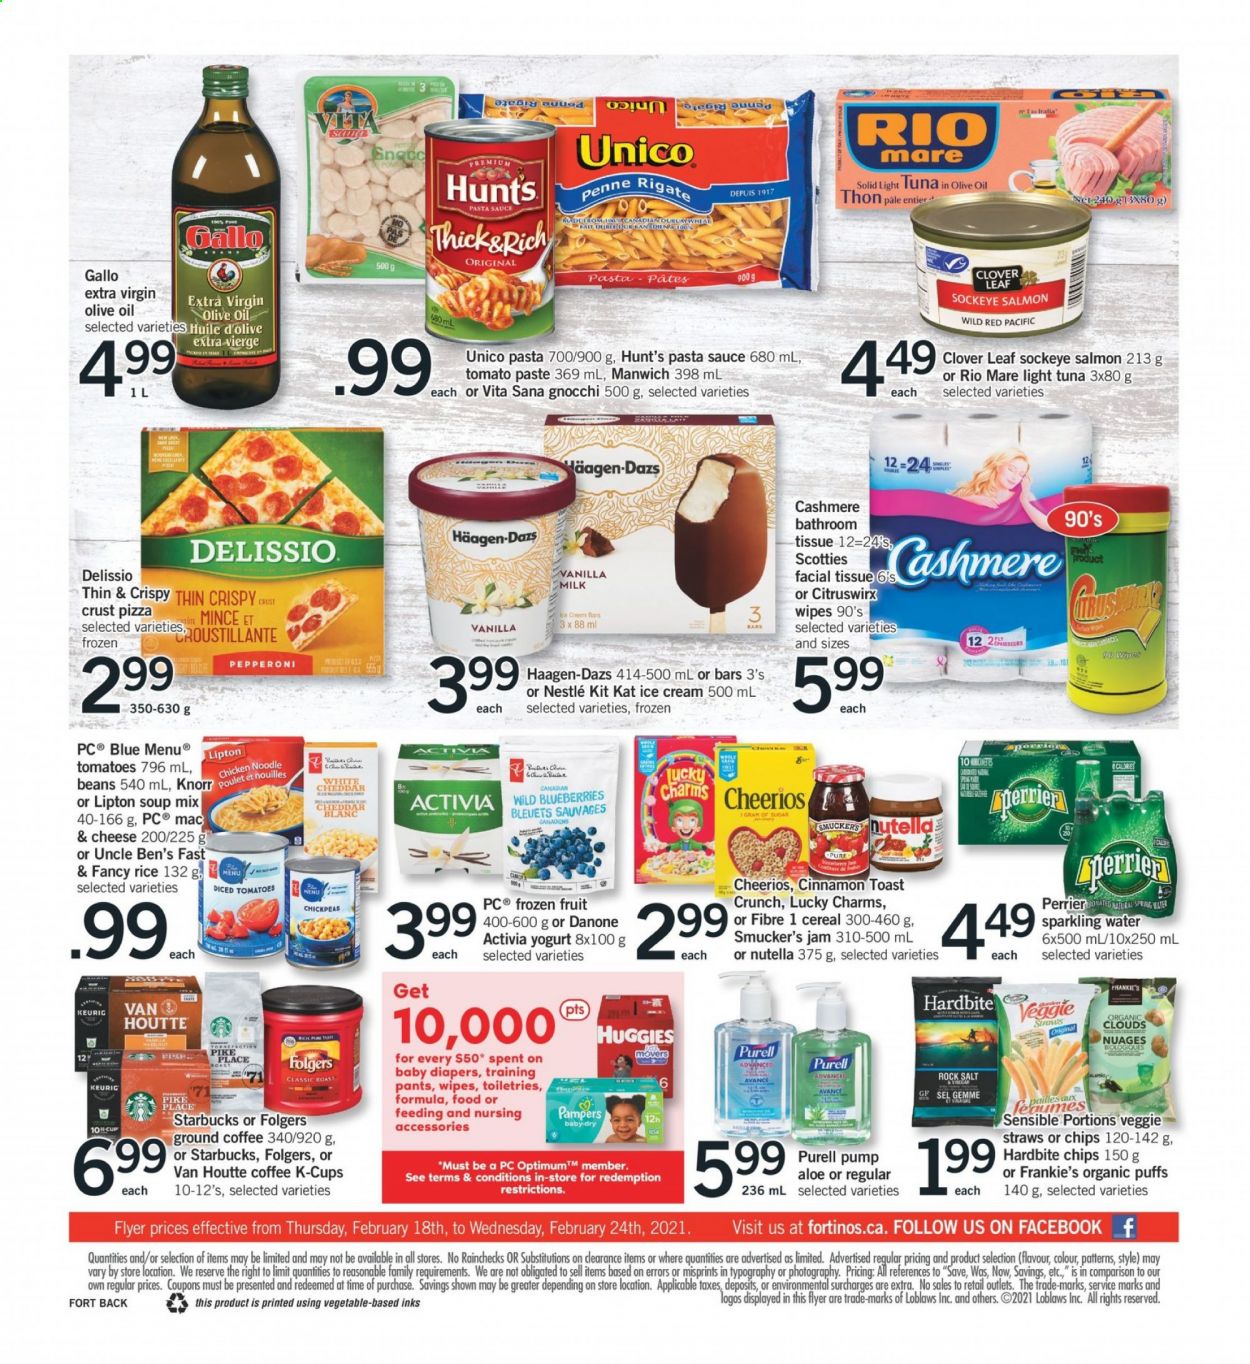 thumbnail - Fortinos Flyer - February 18, 2021 - February 24, 2021 - Sales products - puffs, blueberries, salmon, tuna, pizza, pasta sauce, soup mix, soup, sauce, noodles, pepperoni, yoghurt, Clover, Activia, milk, ice cream, Häagen-Dazs, KitKat, veggie straws, sugar, tomato paste, light tuna, Uncle Ben's, Manwich, cereals, Cheerios, chickpeas, penne, cinnamon, extra virgin olive oil, fruit jam, spring water, sparkling water, coffee, Folgers, ground coffee, coffee capsules, Starbucks, K-Cups, Keurig, wipes, pants, nappies, baby pants, tissues, pump, Knorr, Danone, Nestlé, gnocchi, Huggies, Pampers, Nutella. Page 2.